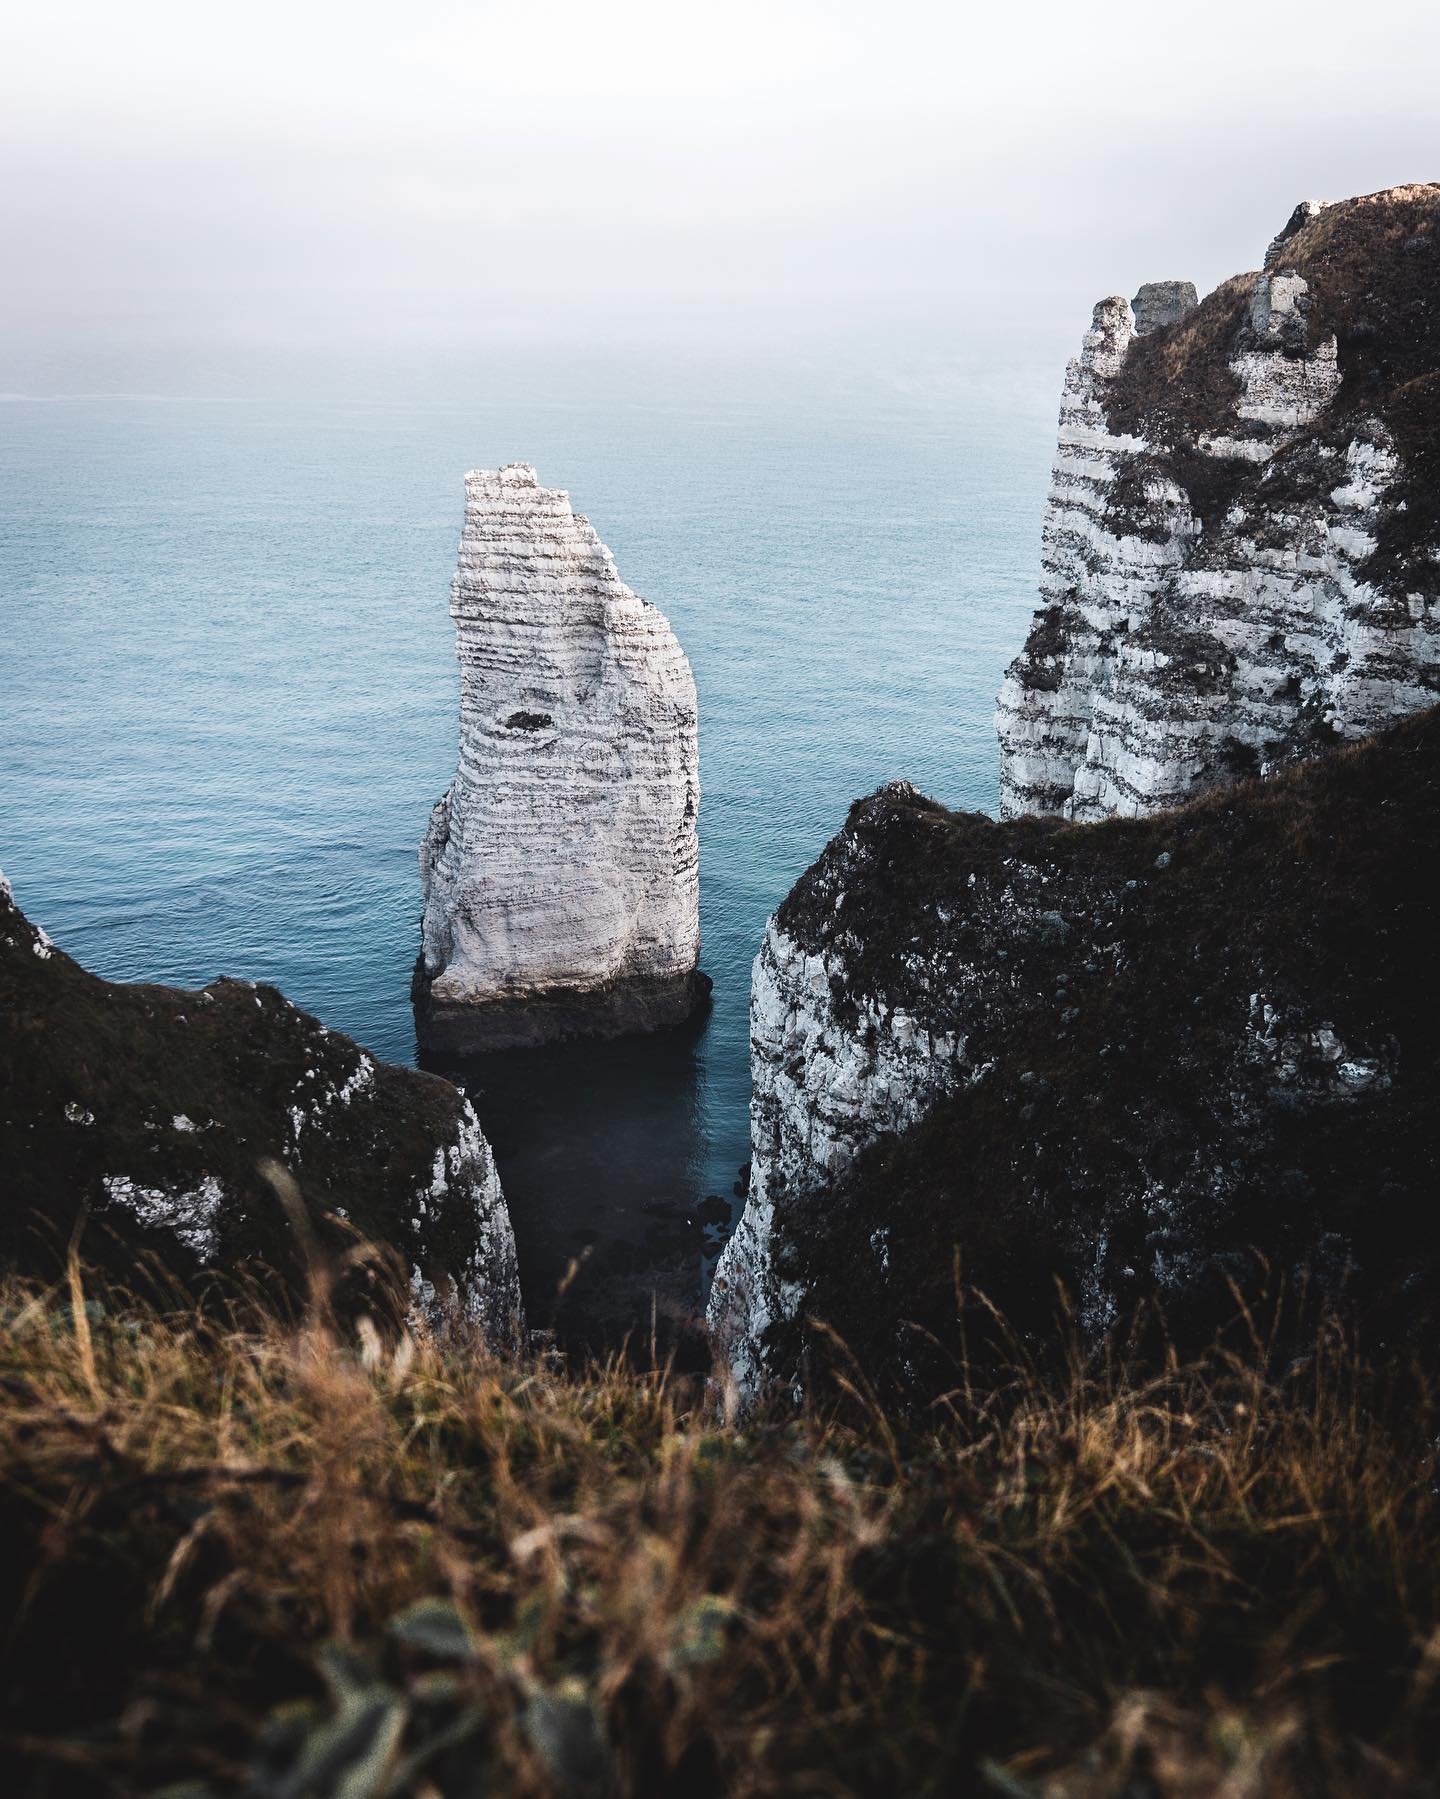 There are various legends about this 77m high „Aiguille“ needle rock. Apparently a secret passage should have led into the rock with a treasure hidden inside.
.
.
.
#etretat #nomadict #thewanderco #wanderlove #thisisadventure #weroamhome #electic_shotz #outdoortones #staywander #roamtheworld #germanphotography #germanexplorers #earthoutdoors #wildvisuals #thewildlenses #germanvision #wondermore #momentkeepers #landschaftsfotografie #wekeepmoments #weroamtheworld #visualvibesgermany #germanroamers #terrax #landschaftsfotografie #zdf #ourdailyplanet #roamanywhere #neuehorizonte
.
@wanderforever_ @thewander.co @moodygrams @stayandwander @visualsofearth @voyaged @raw_allnature @stayandwander @raw_reflection_ @rsa_outdoors